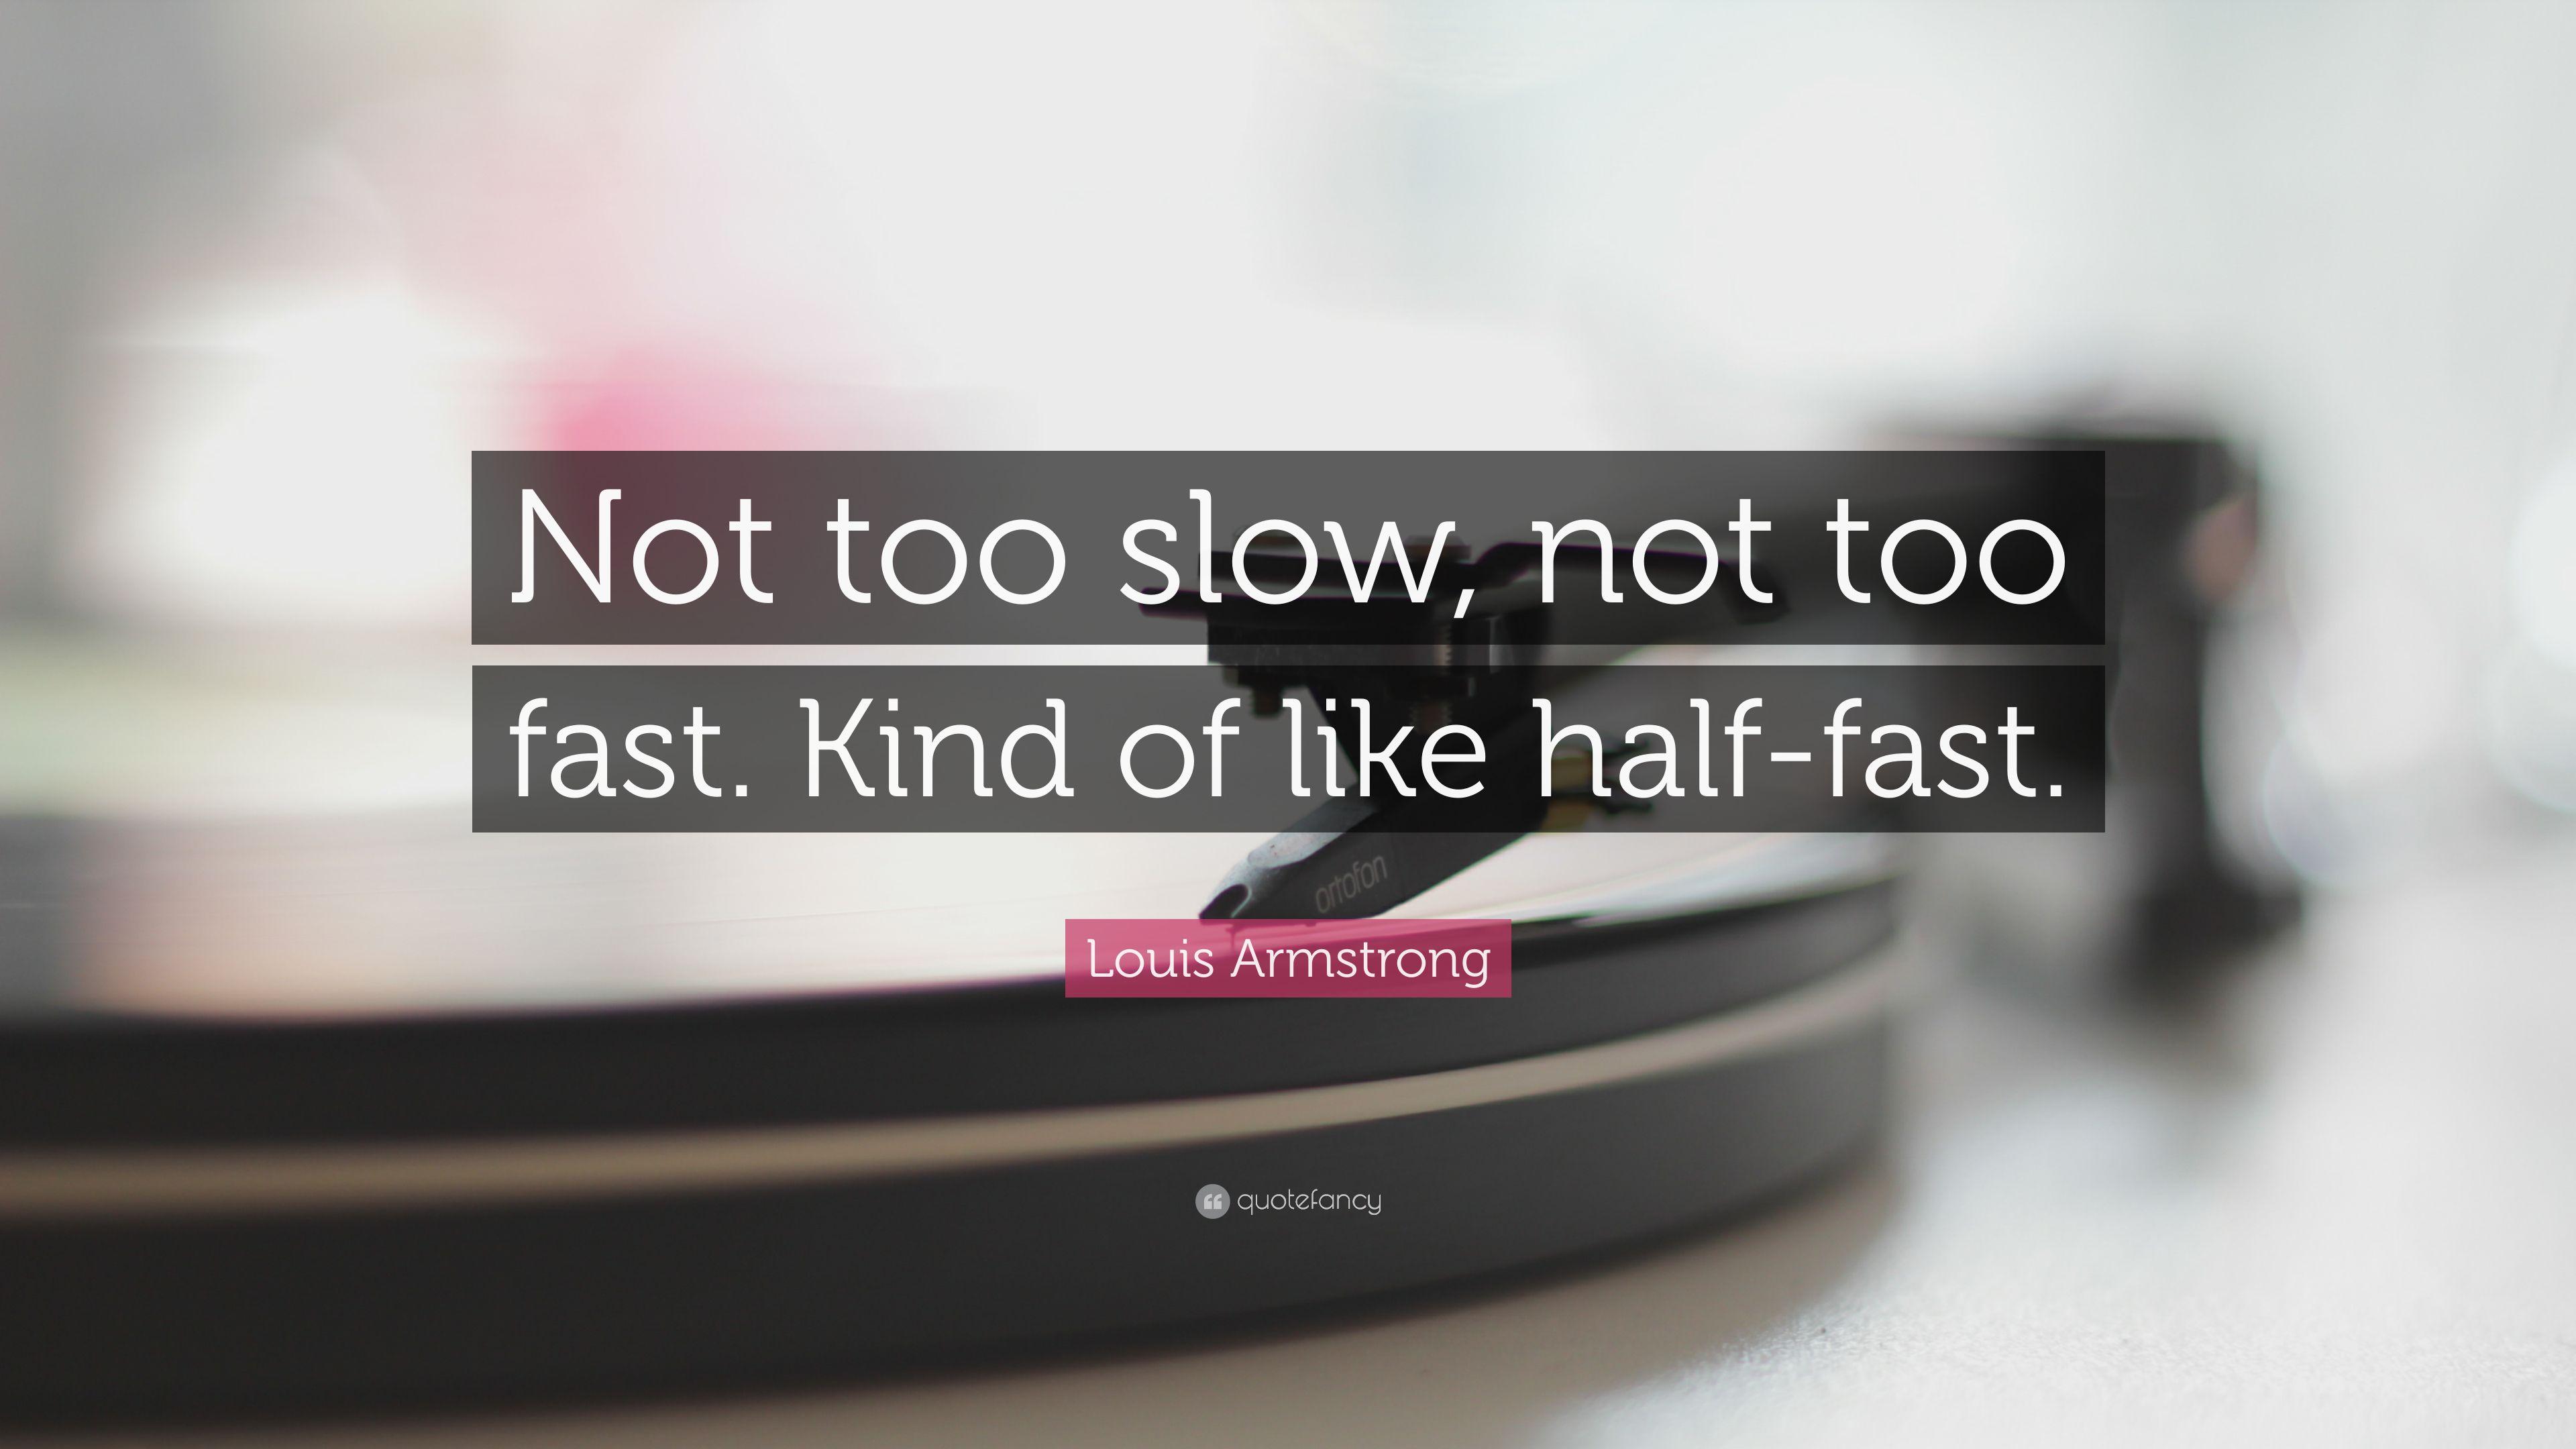 Louis Armstrong Quote: “Not too slow, not too fast. Kind of like